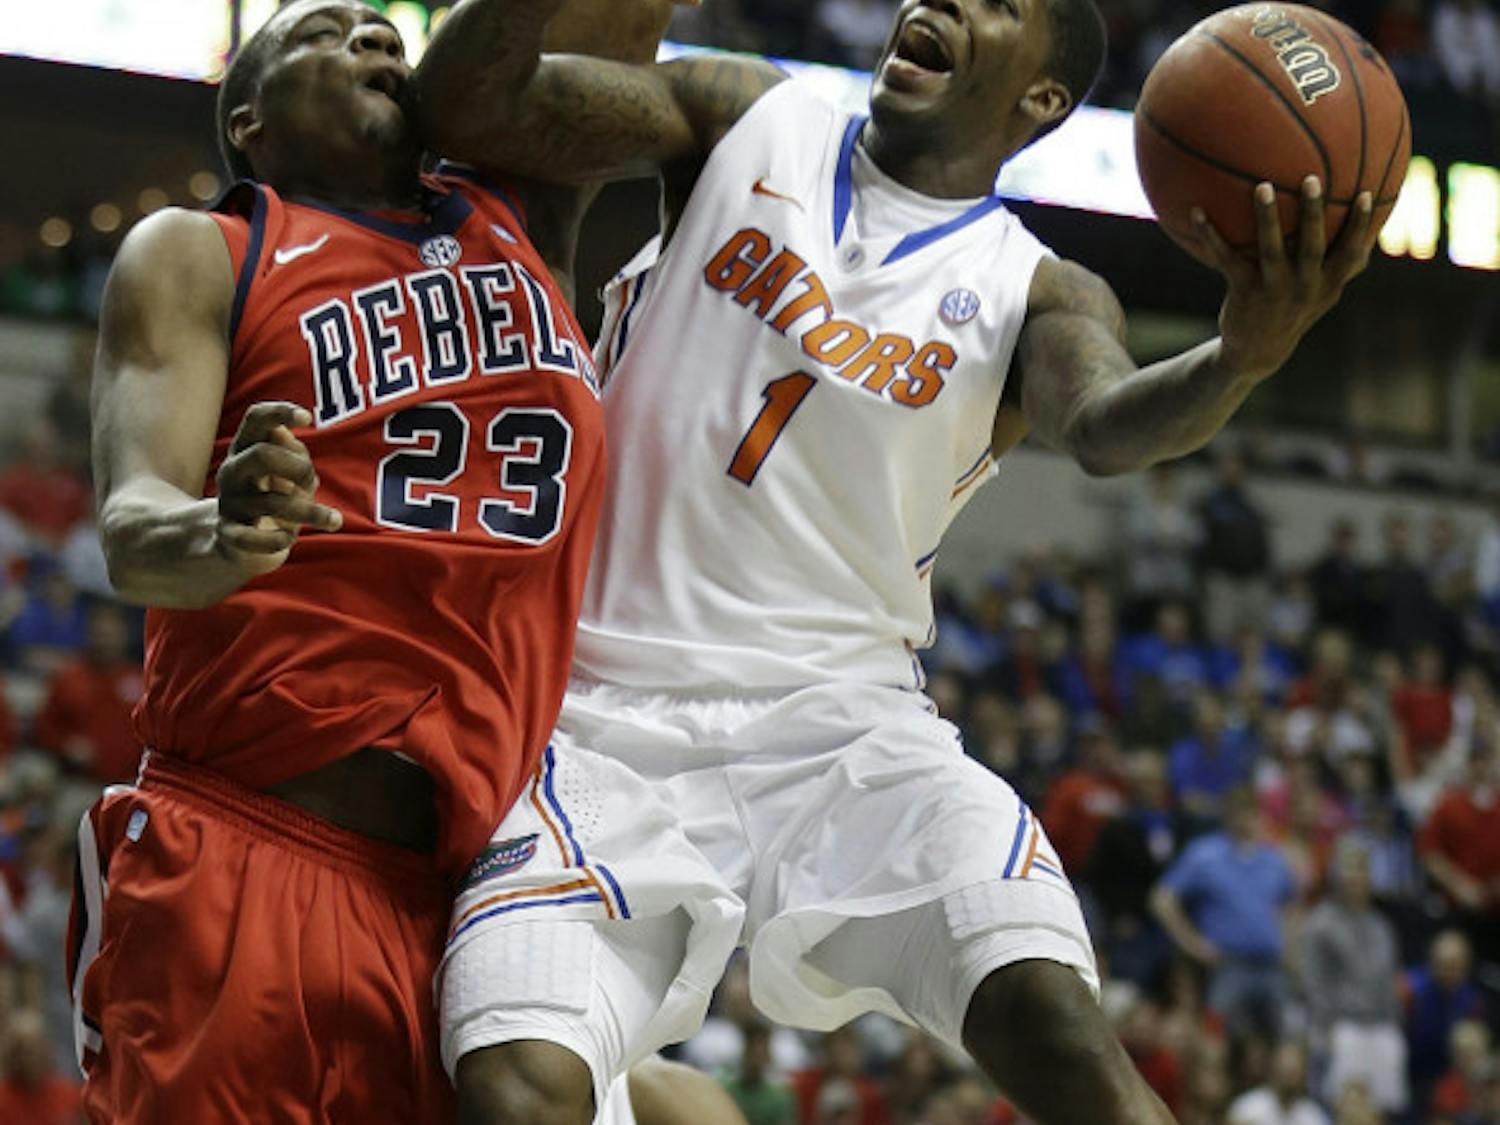 Senior guard Kenny Boynton (1) takes it to the basket during Florida’s 66-63 loss to Ole Miss in the SEC Tournament final on March 17 at Bridgestone Arena in Nashville, Tenn. Boynton and the Gators have lost in the Elite Eight each of the last two years.